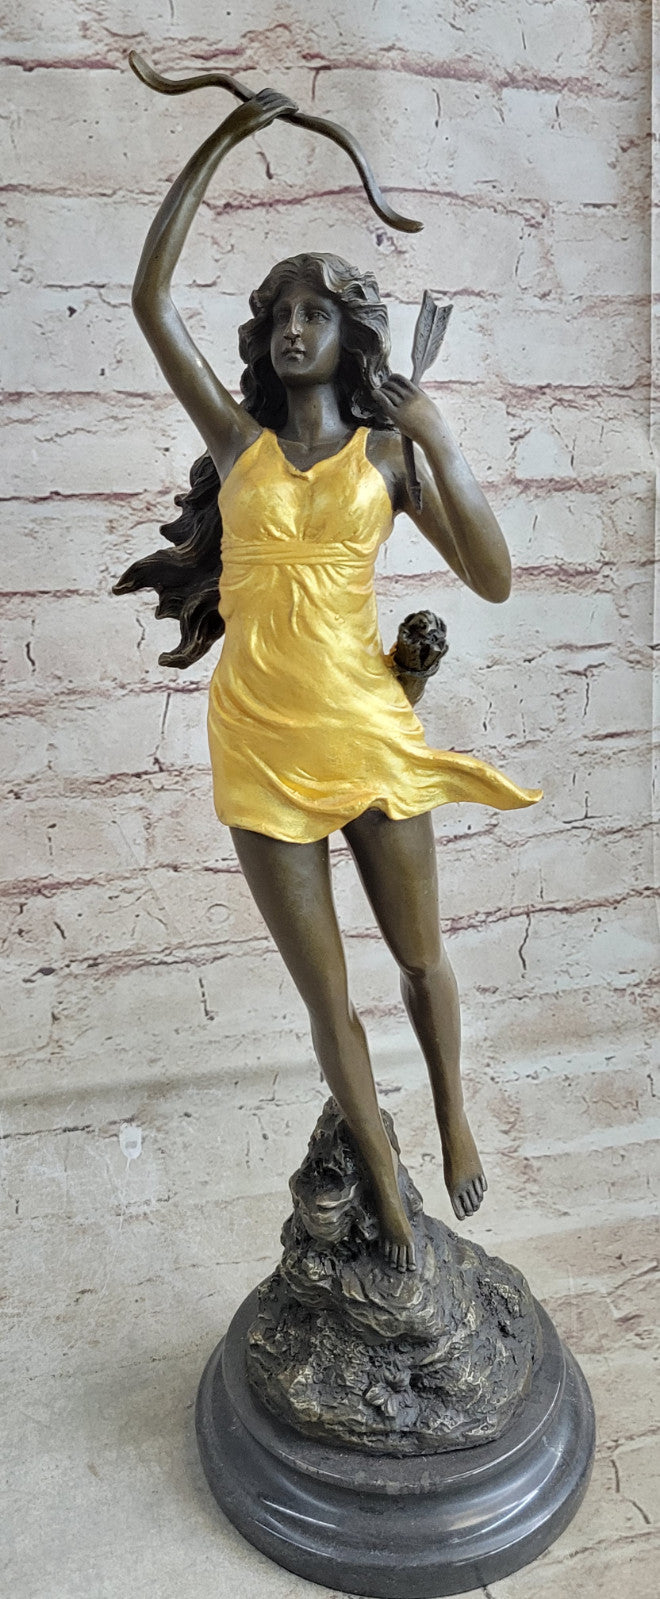 Signed Cast Bronze Diana The Huntress Art Deco Nude Sculpture Statue Mythical